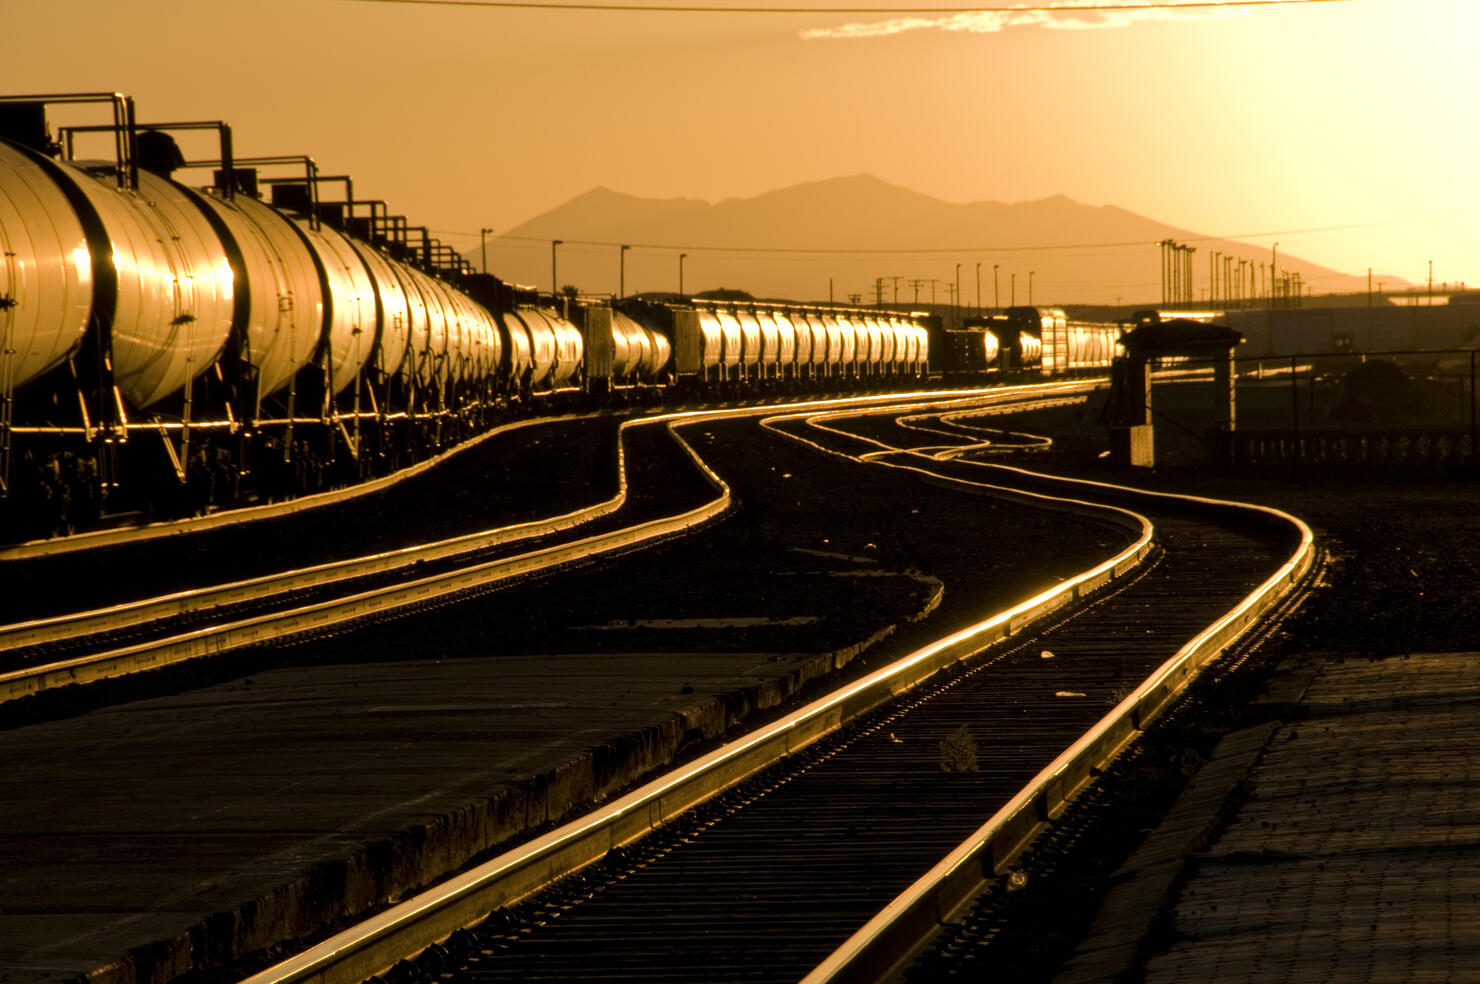 Train carrying tanks of liquefied natural gas